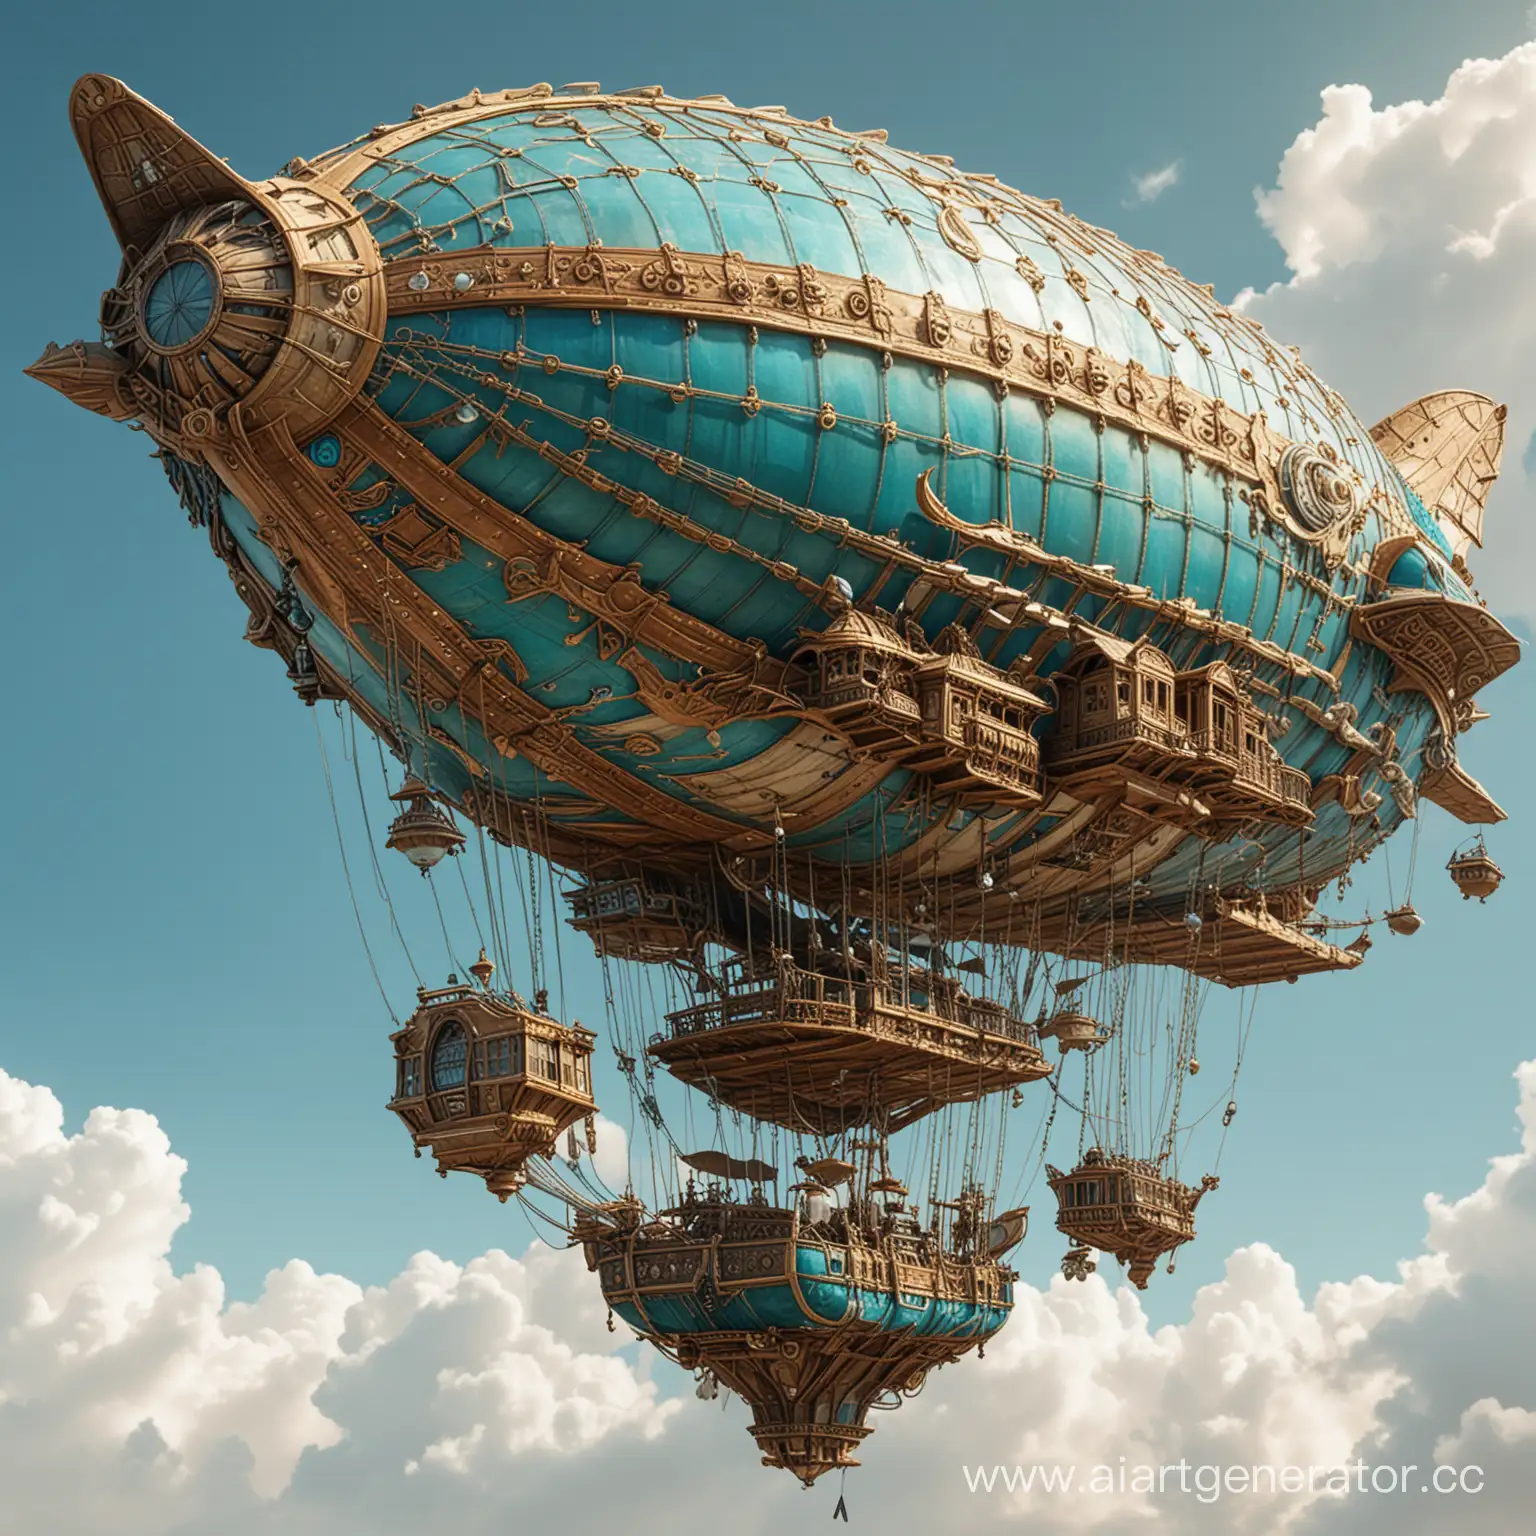 Whimsical-Blue-and-Turquoise-Airship-with-Intricate-Details-and-Textures